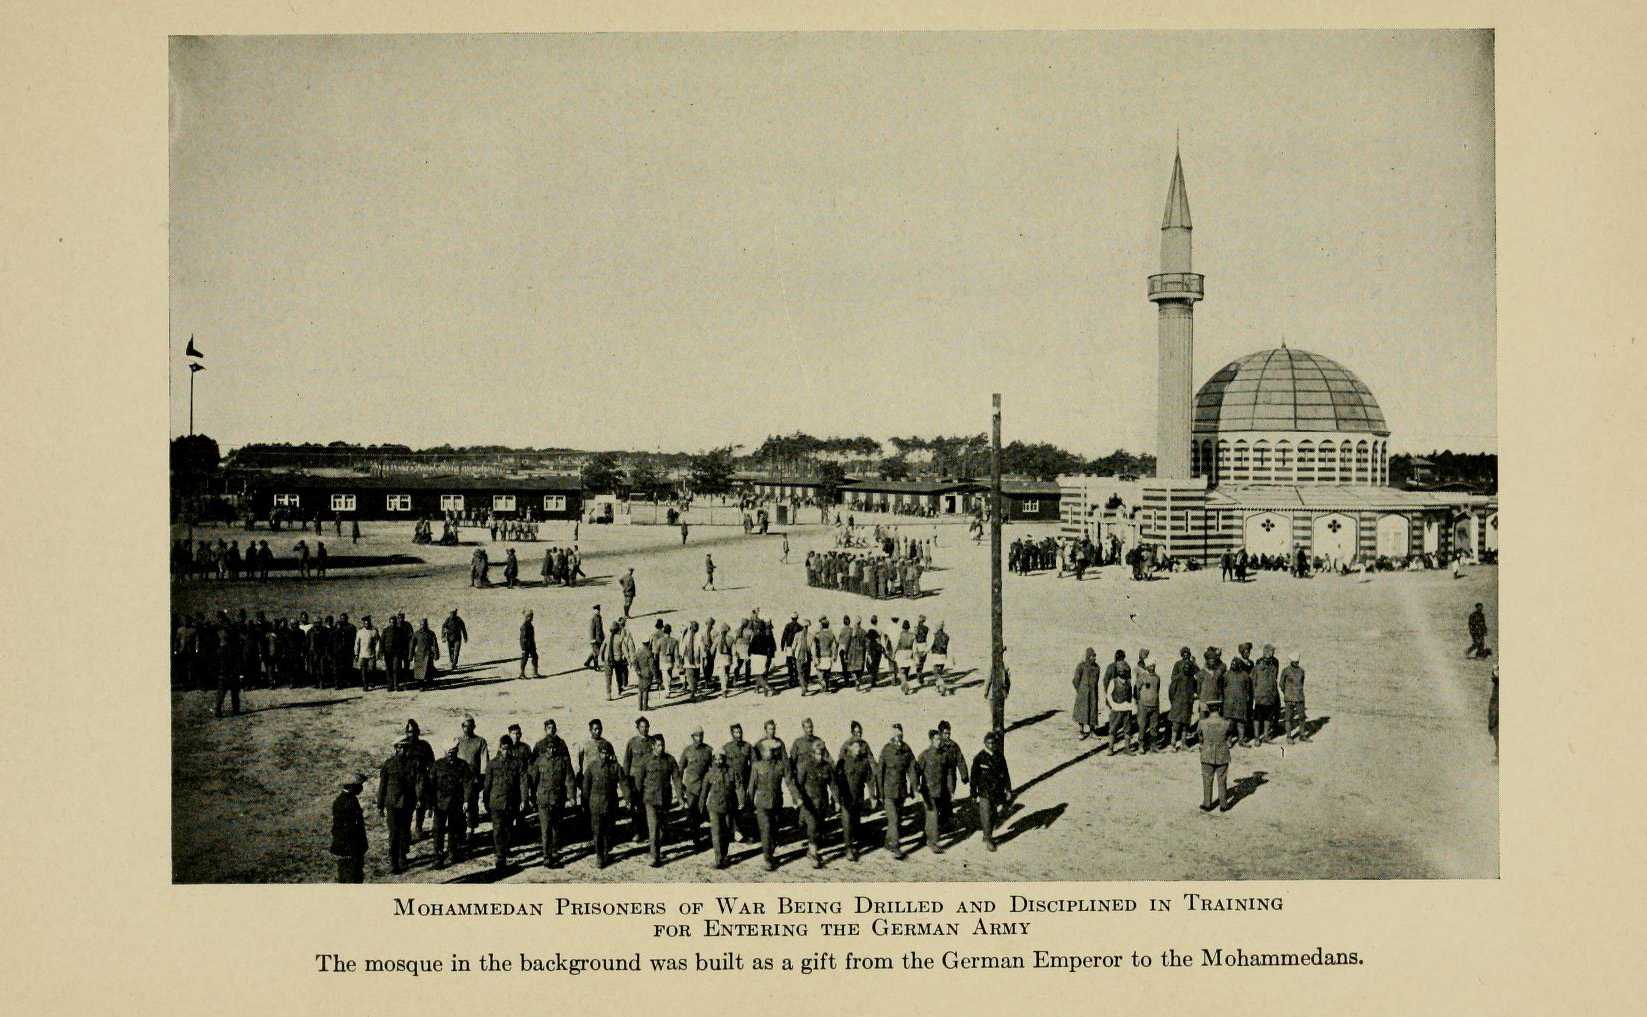 Black and white photograph of groups of men in prison uniform marching in lines across an open space. A mosque is in the background. Text: Mohammedan Prisoners of War Being Drilled and Disciplined in Training for Entering the German Army. The mosque in the background was build as a gift from the German Emperor to the Mohammedans.